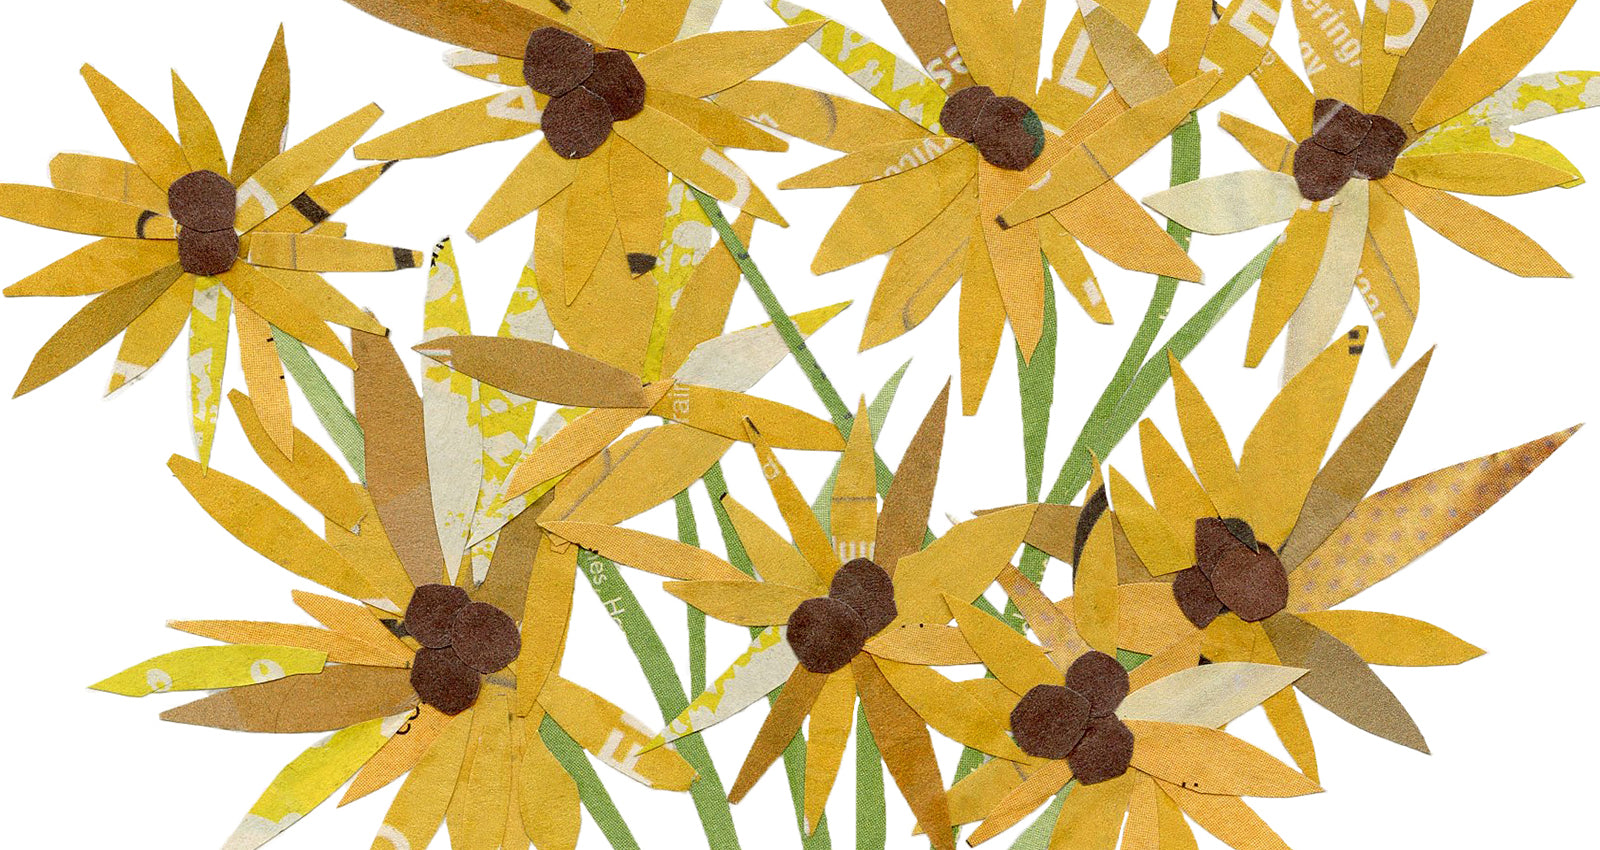 A close up of a textured collage of bright, sunny sunflowers on whimsical green stems poking out of a blue ginger jar vase.